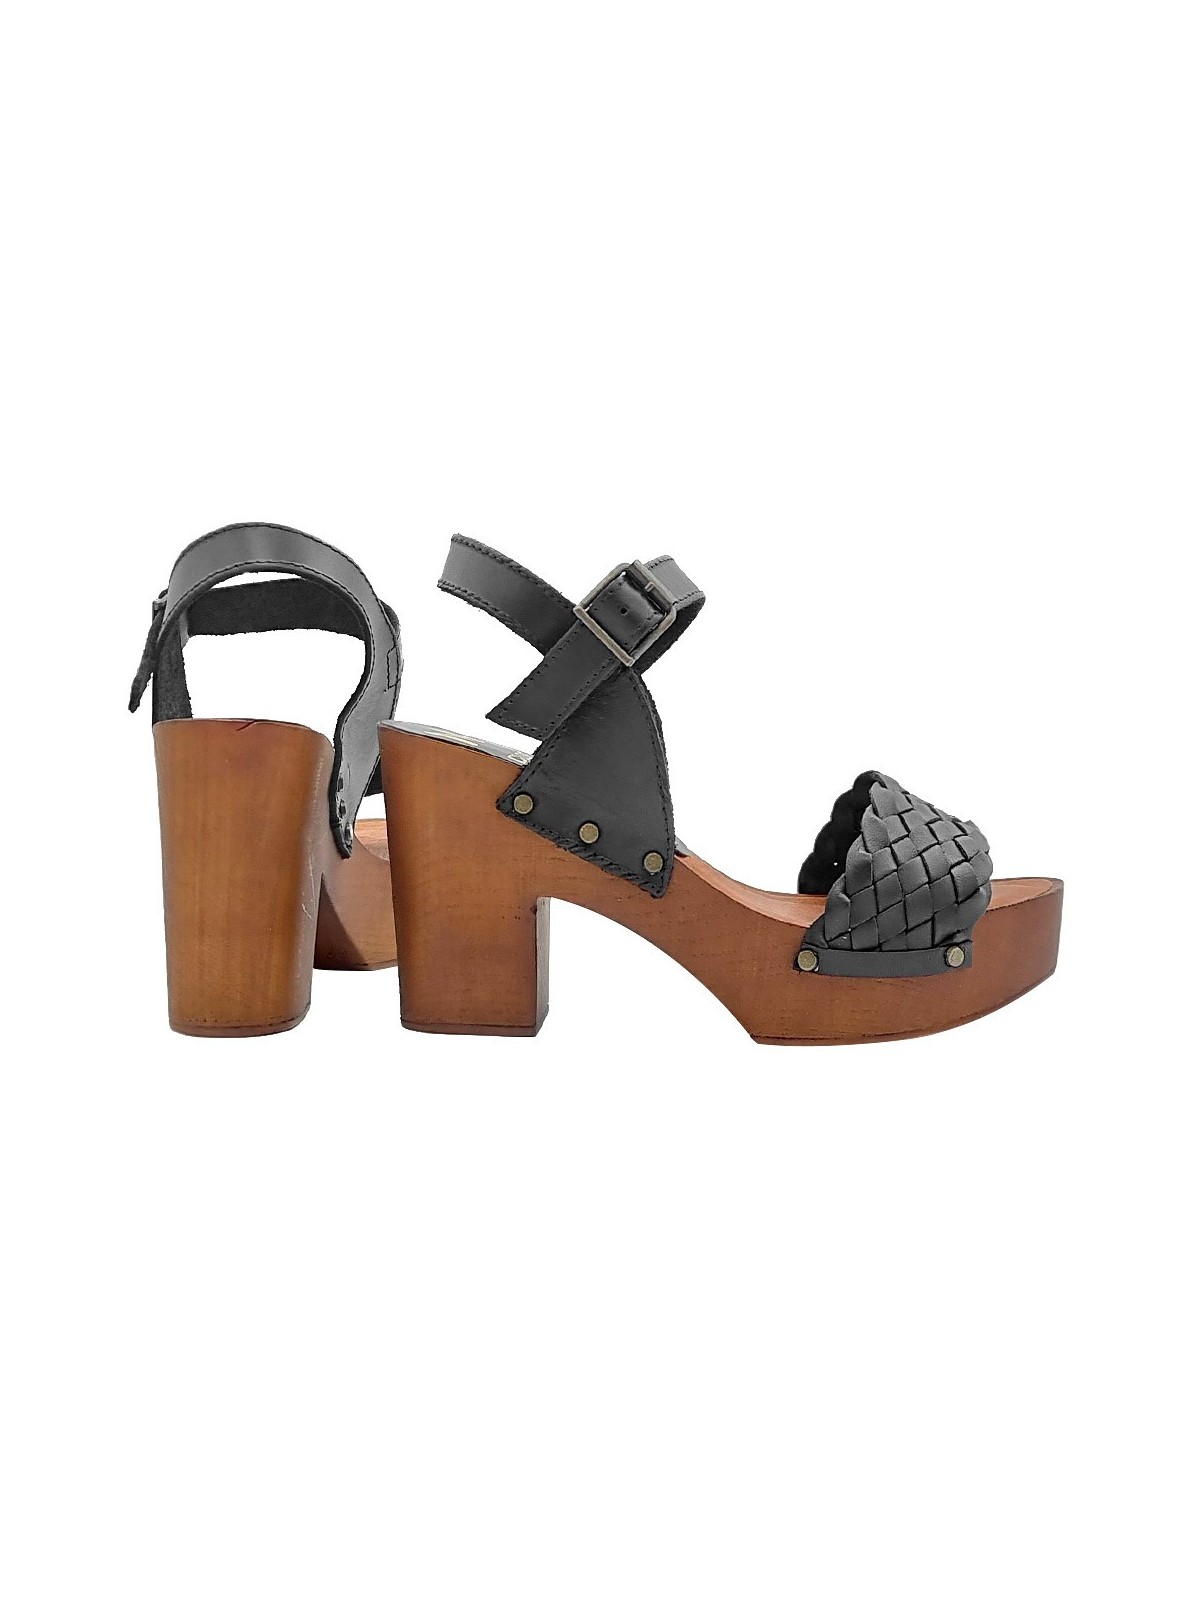 BLACK SANDALS WITH WOVEN BAND AND HEEL 9